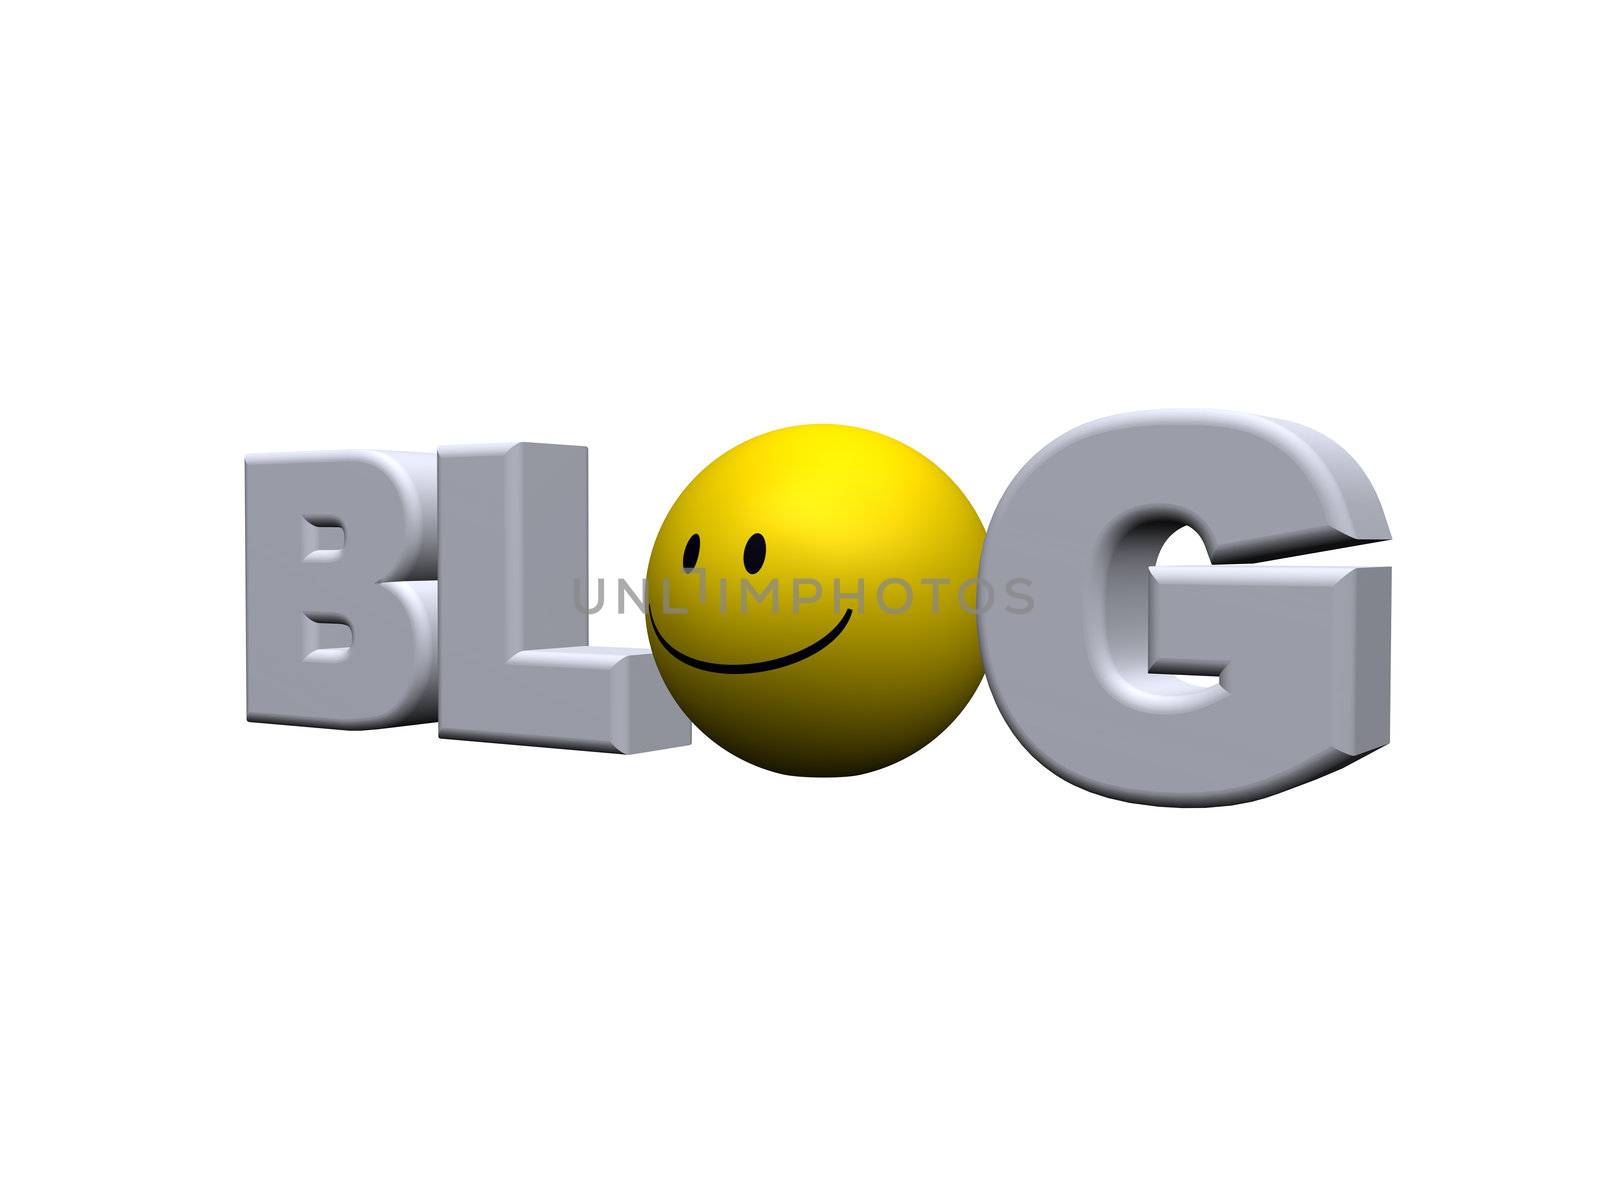 the word blog and smiley - 3d illustration